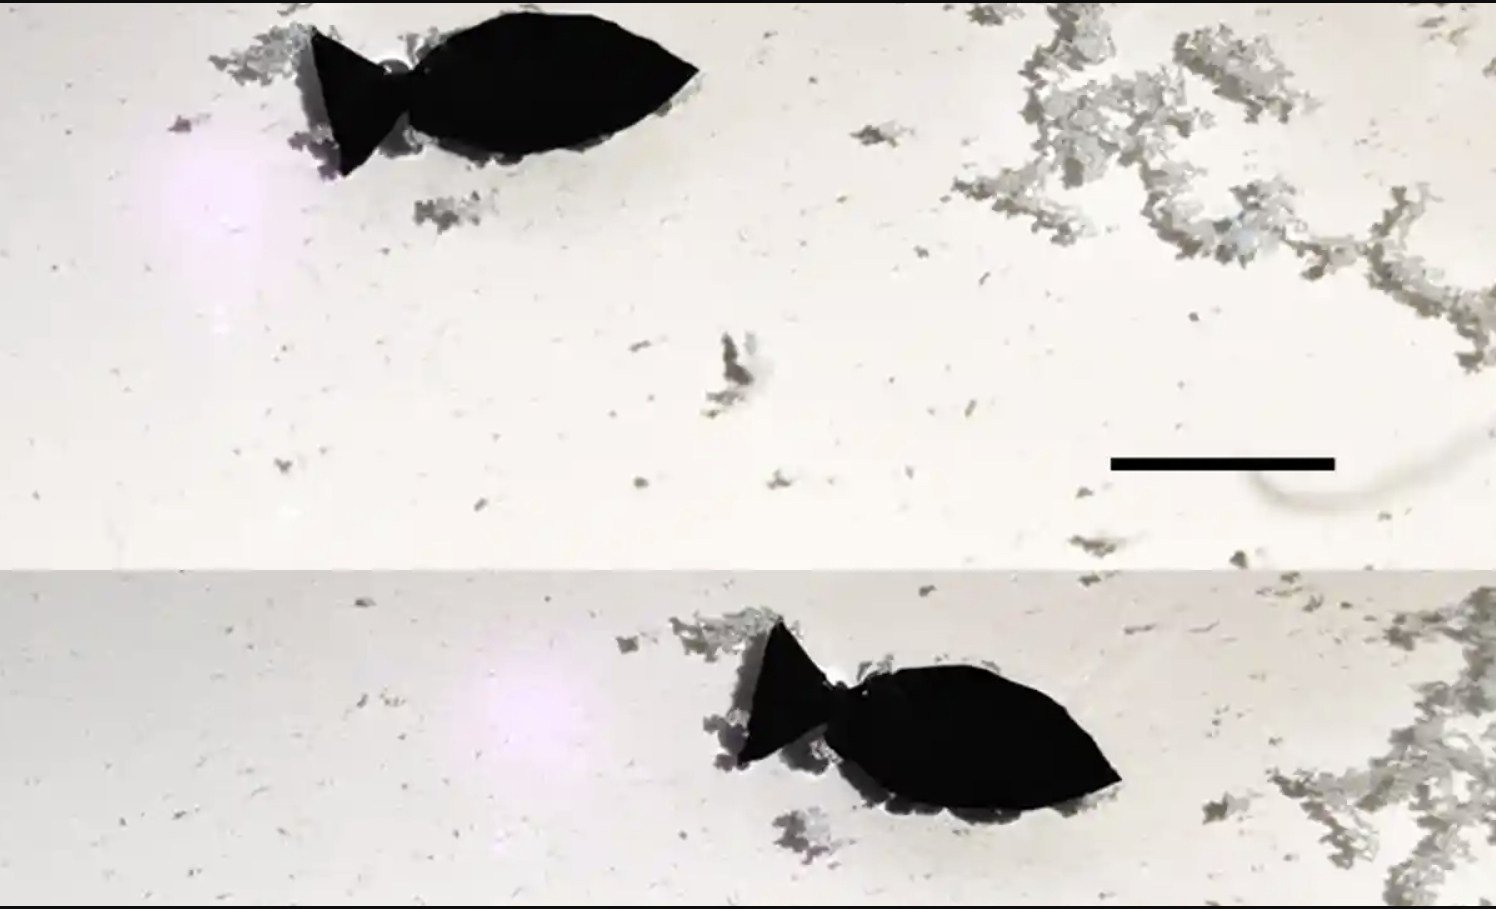 The self-propelled robot fish can “suck” microplastics out of the water, Chinese researchers say. Photo: Nano Letters 